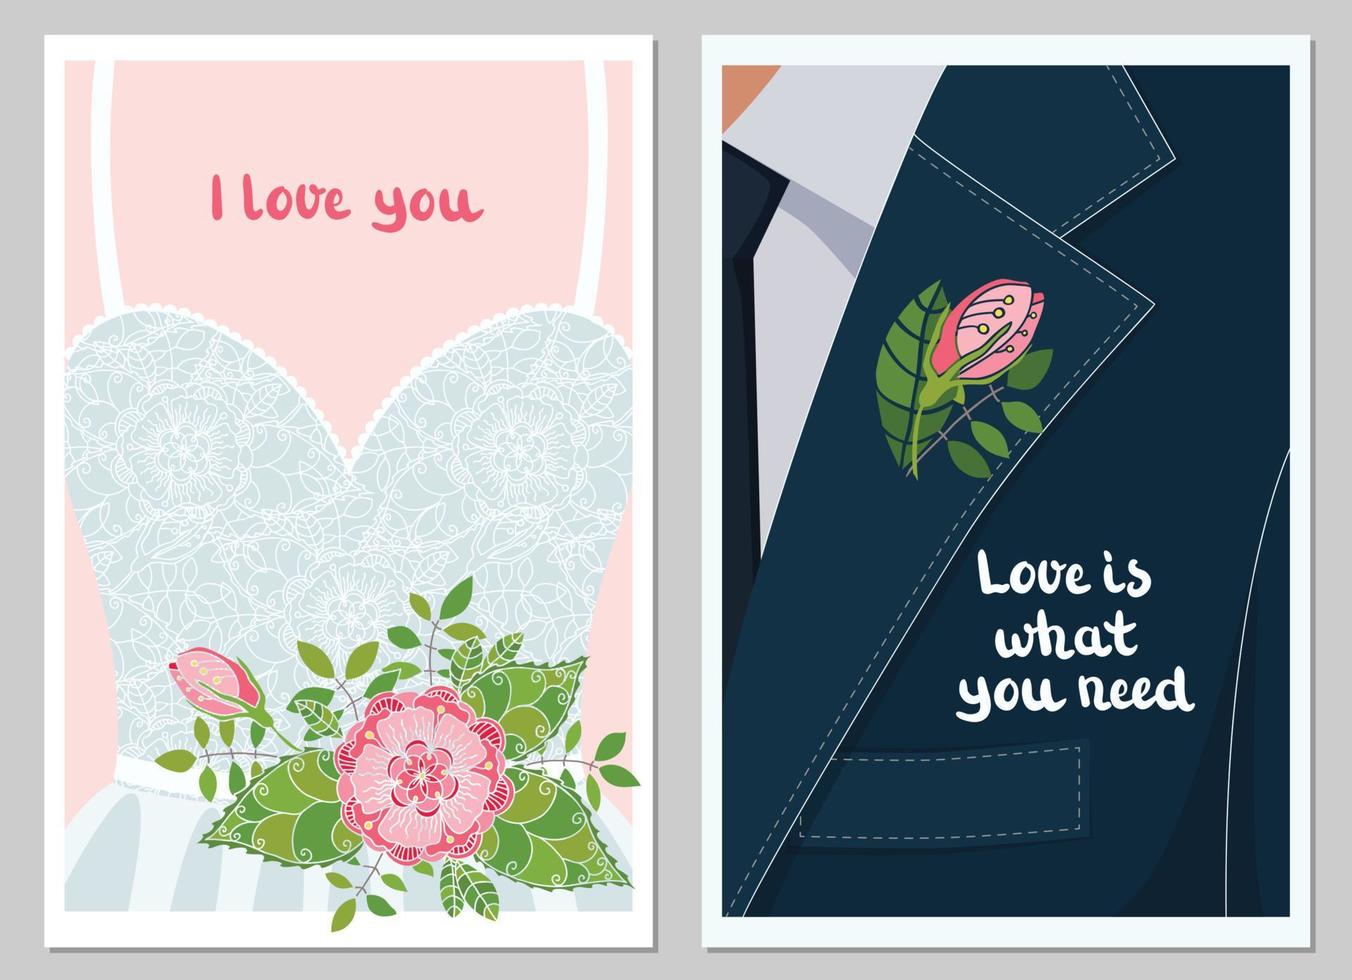 Vector illustration. Wedding cards with romantic lettering. Bride and groom. Lettering - I love you, Love is what you need. Decorative wedding flowers - bouquet, boutonniere. Dress and suit.